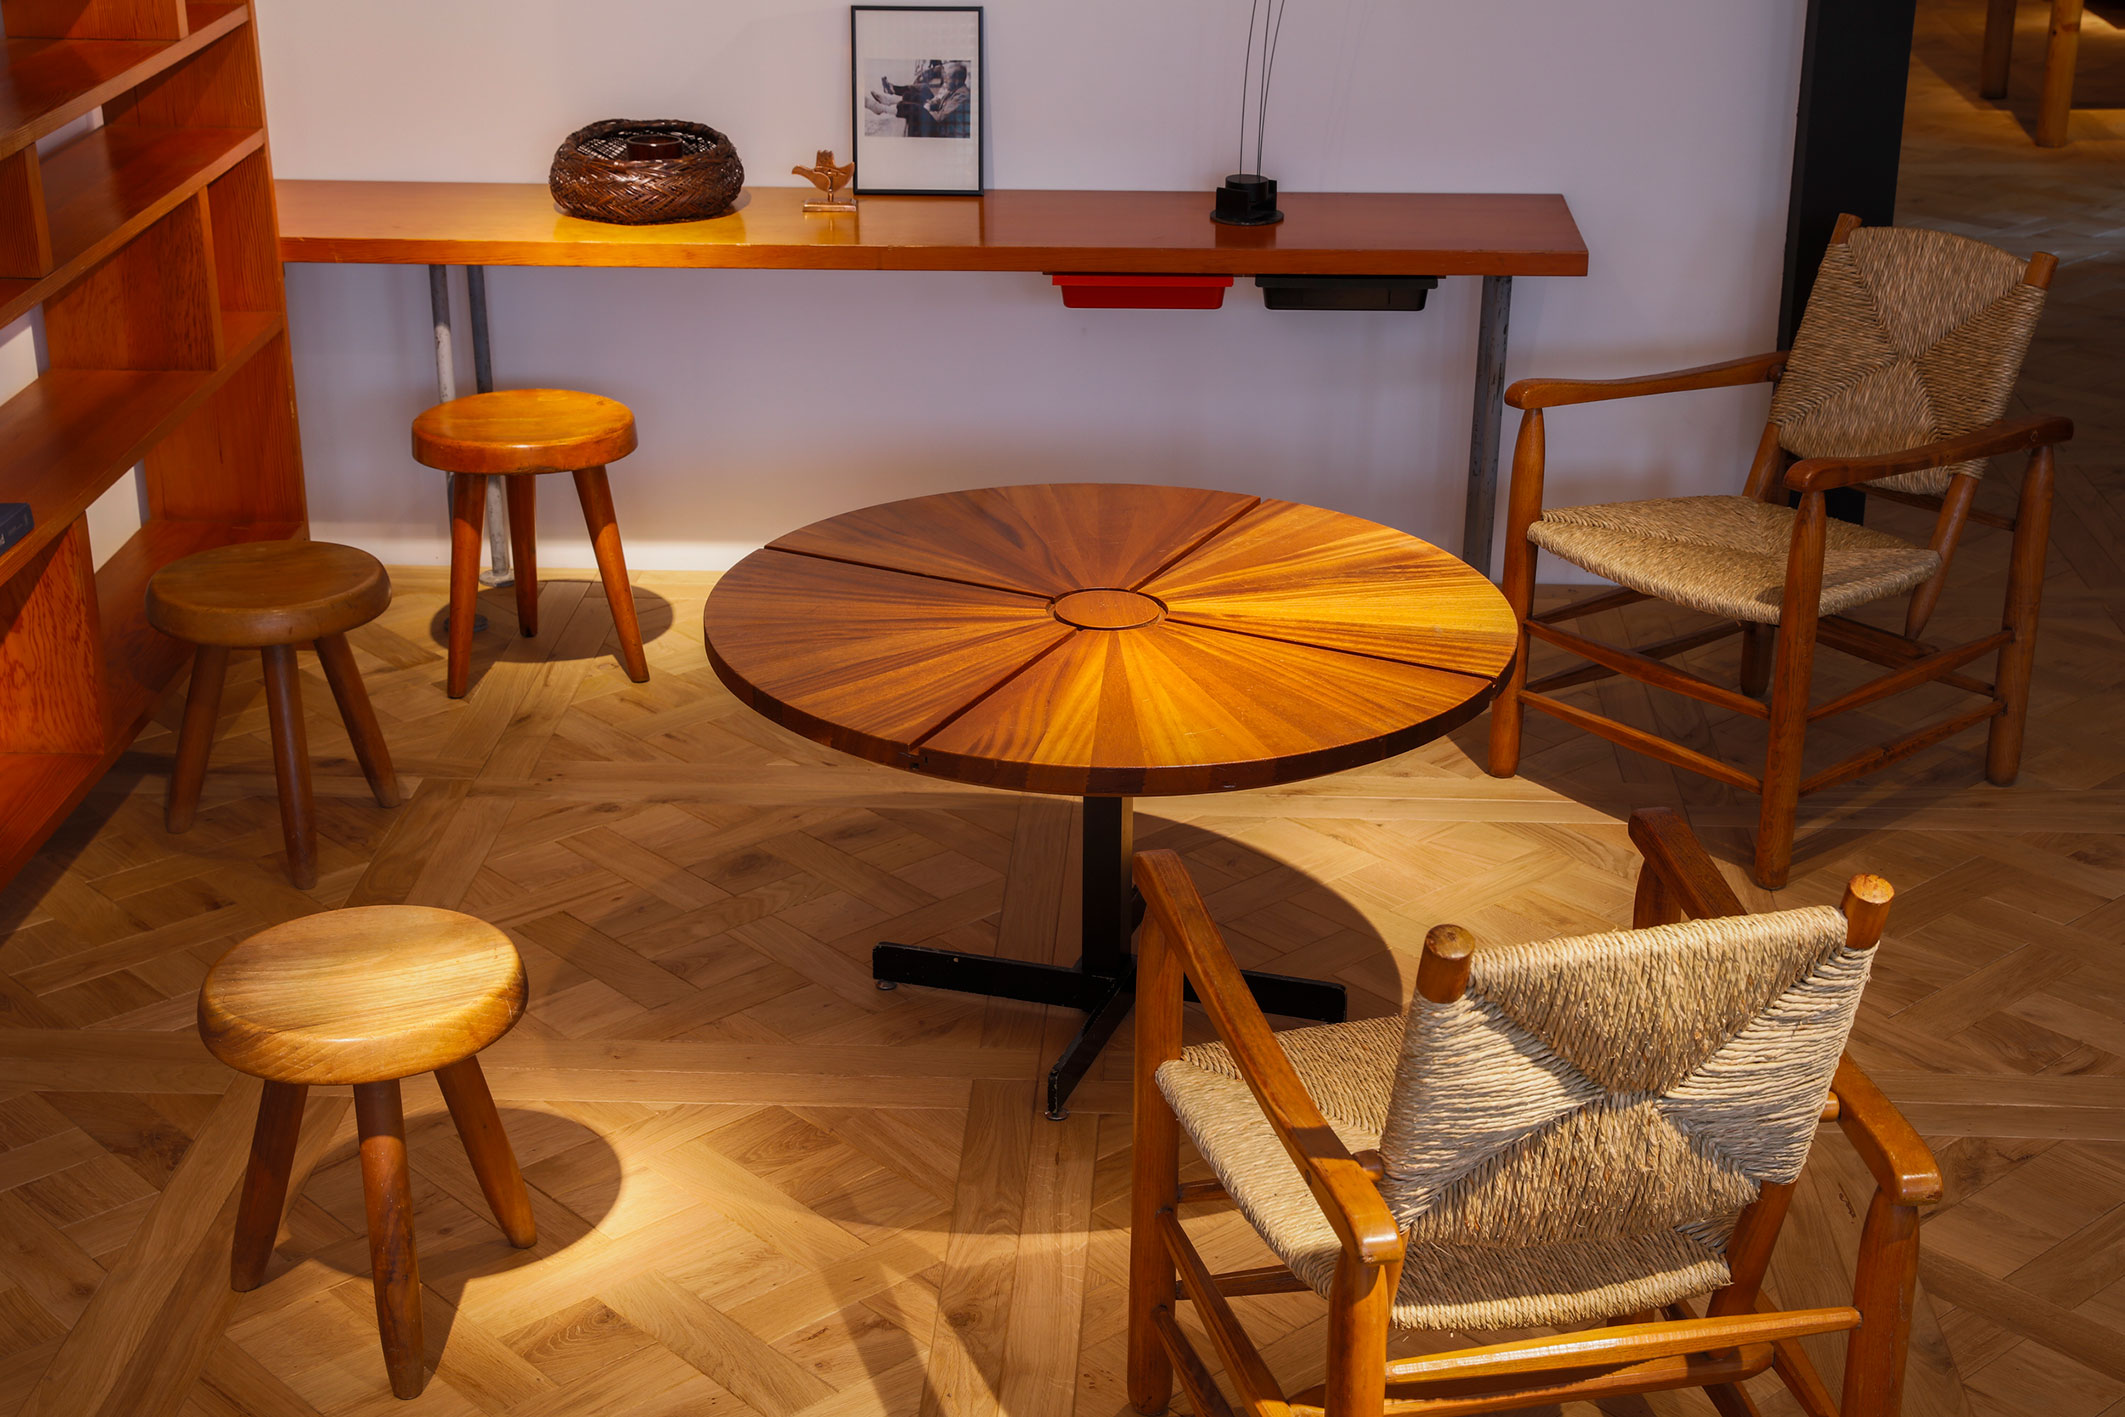 Charlotte Perriand: The Modern Life – Anise Gallery